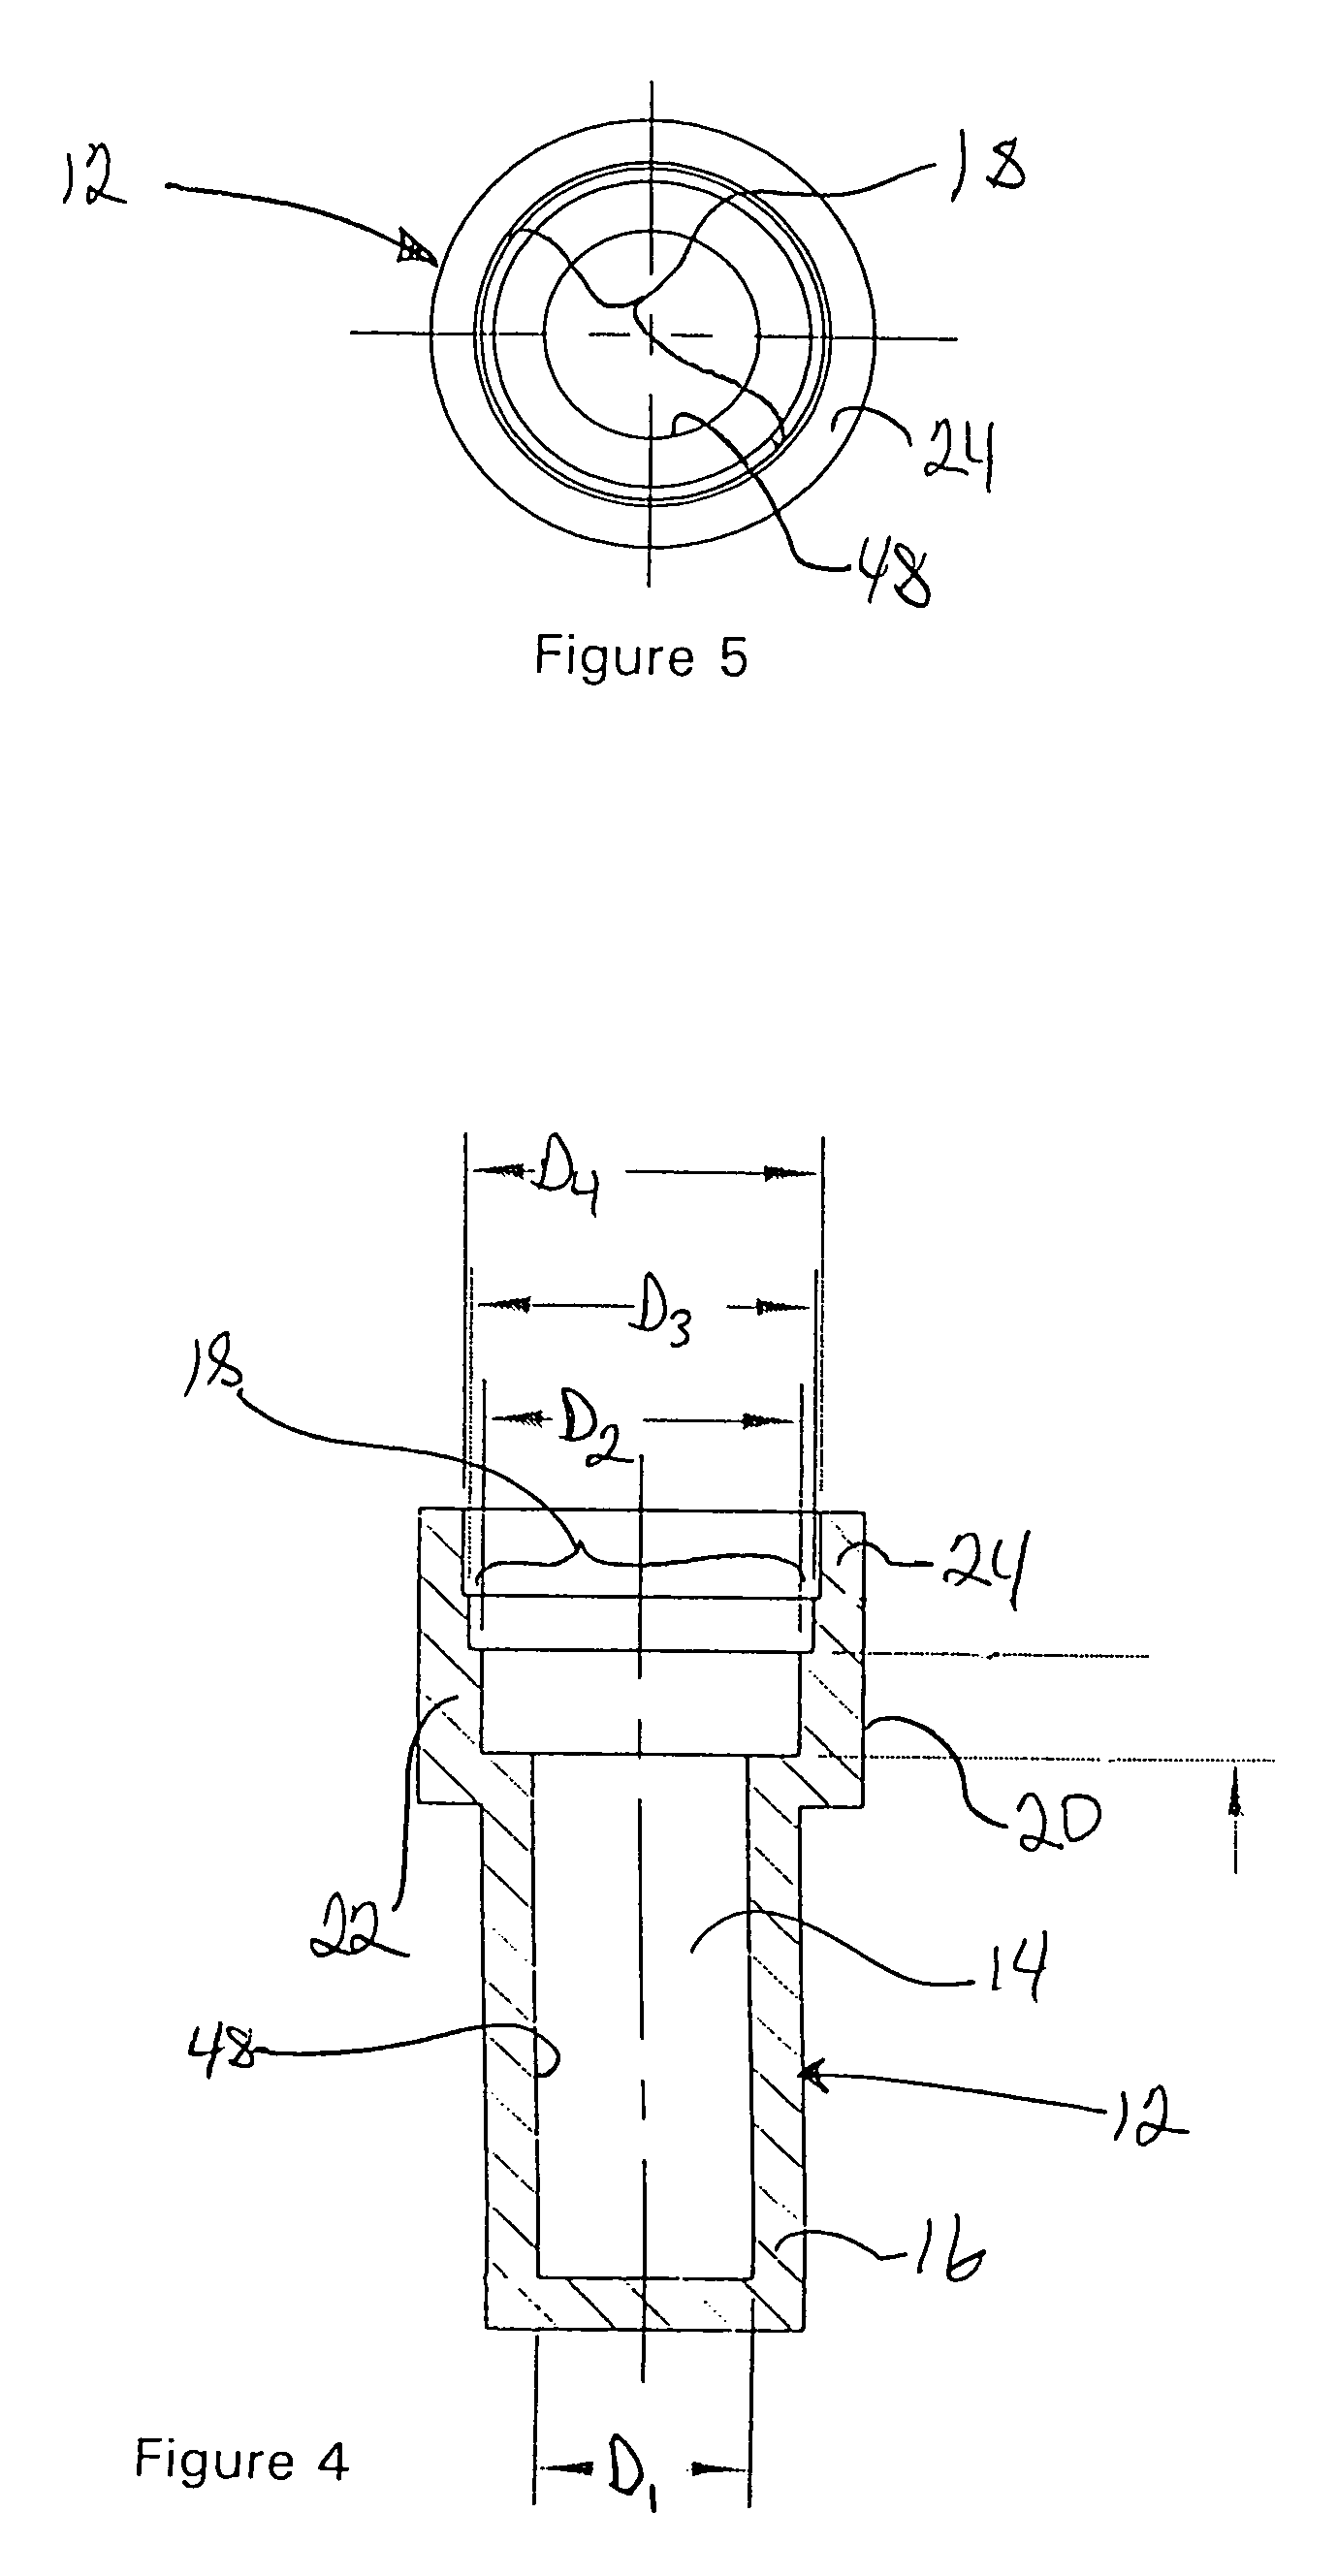 Self-contained thermal actuator